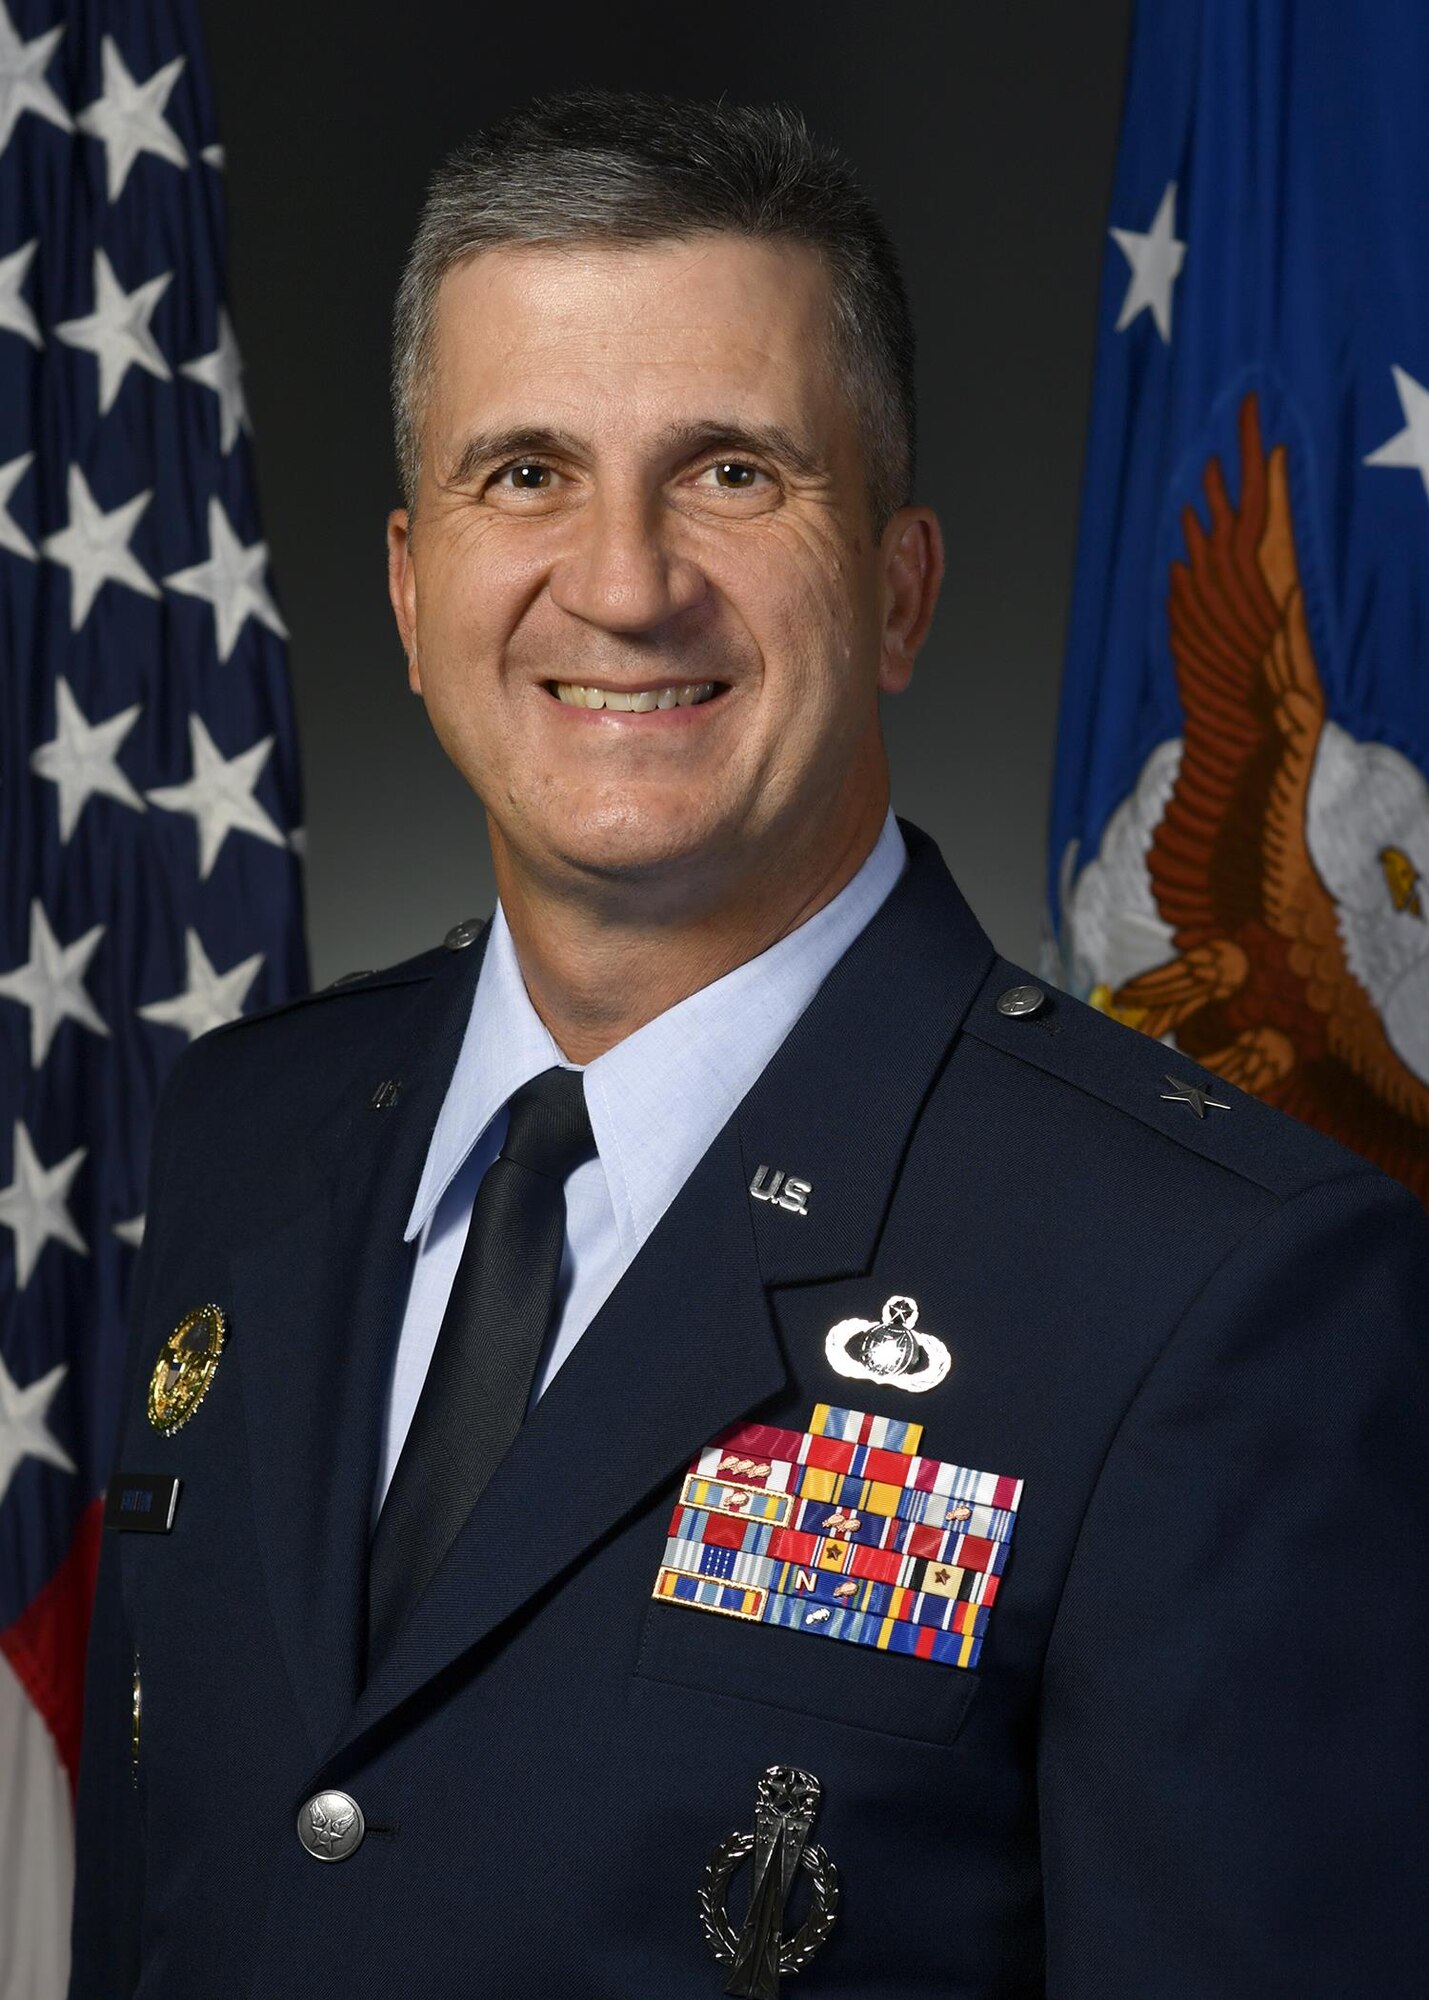 Brig. Gen. Ryan Britton will become the next Program Executive Officer for the Air Force Life Cycle Management Center's Presidential & Executive Airlift Directorate headquartered at Wright-Patterson Air Force Base.